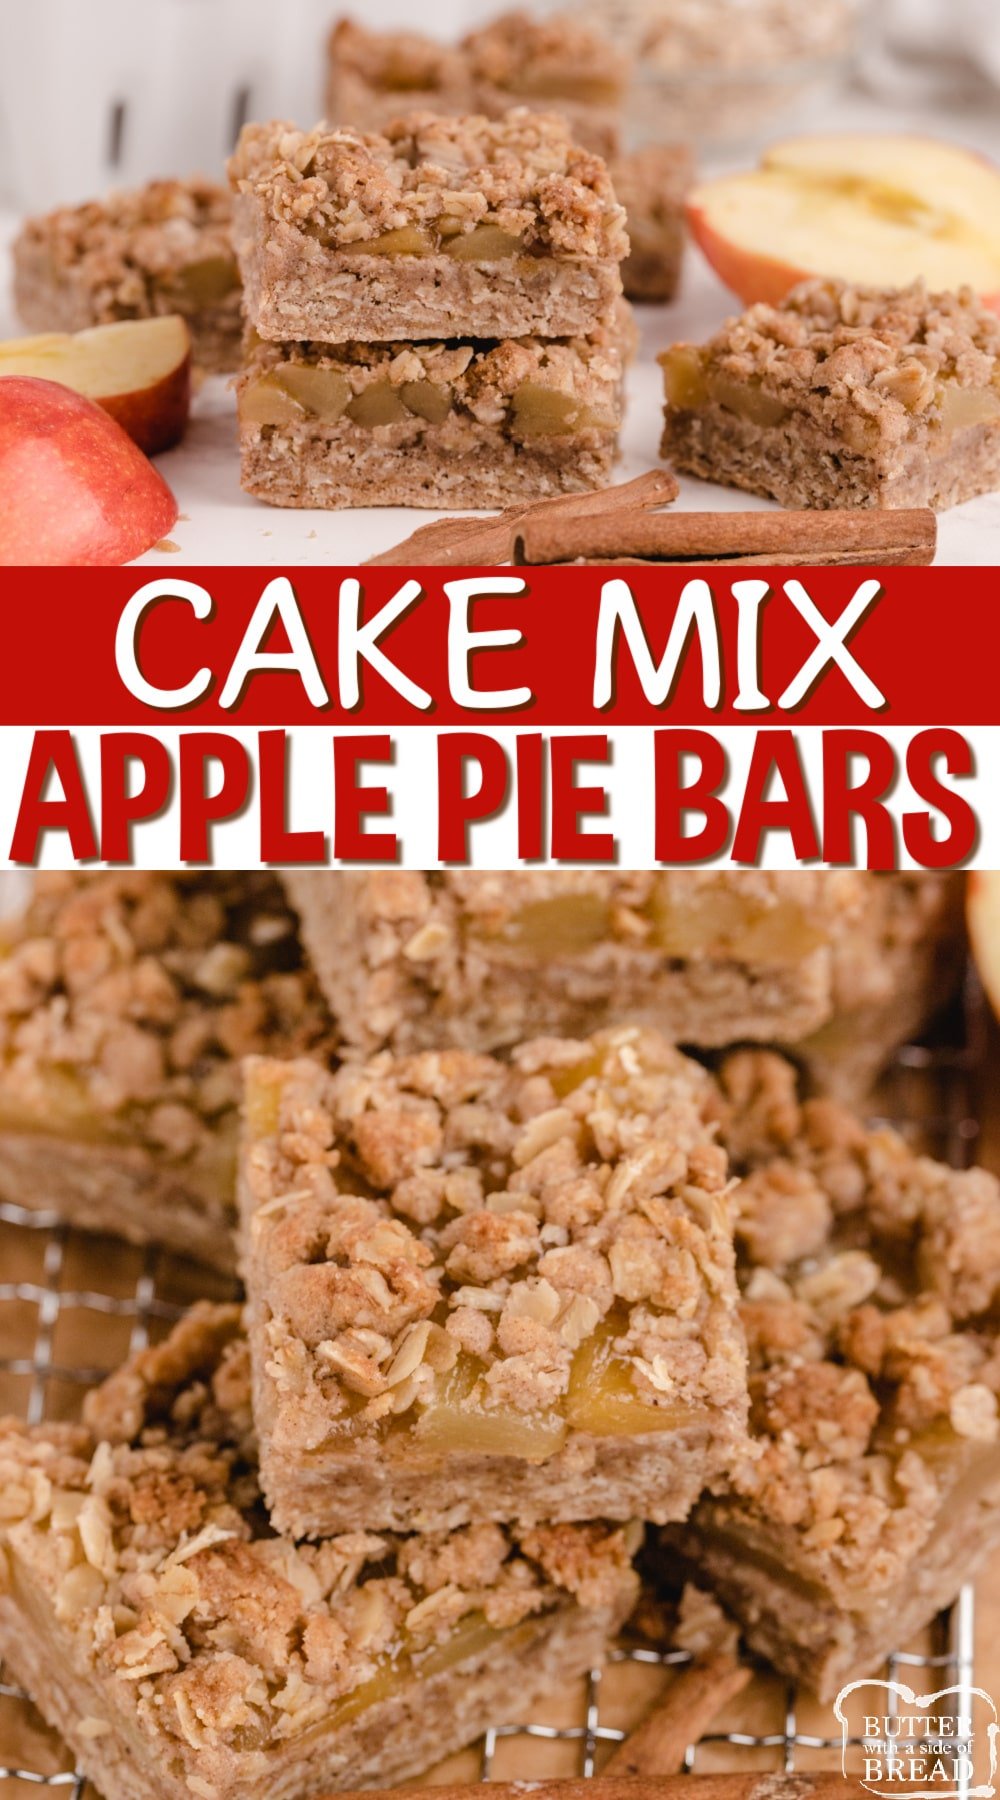 Cake Mix Apple Pie Bars are made with a cake mix, oats, a can of apple pie filling and a few other basic ingredients. An easy and delicious cake mix dessert that tastes just like apple pie! 